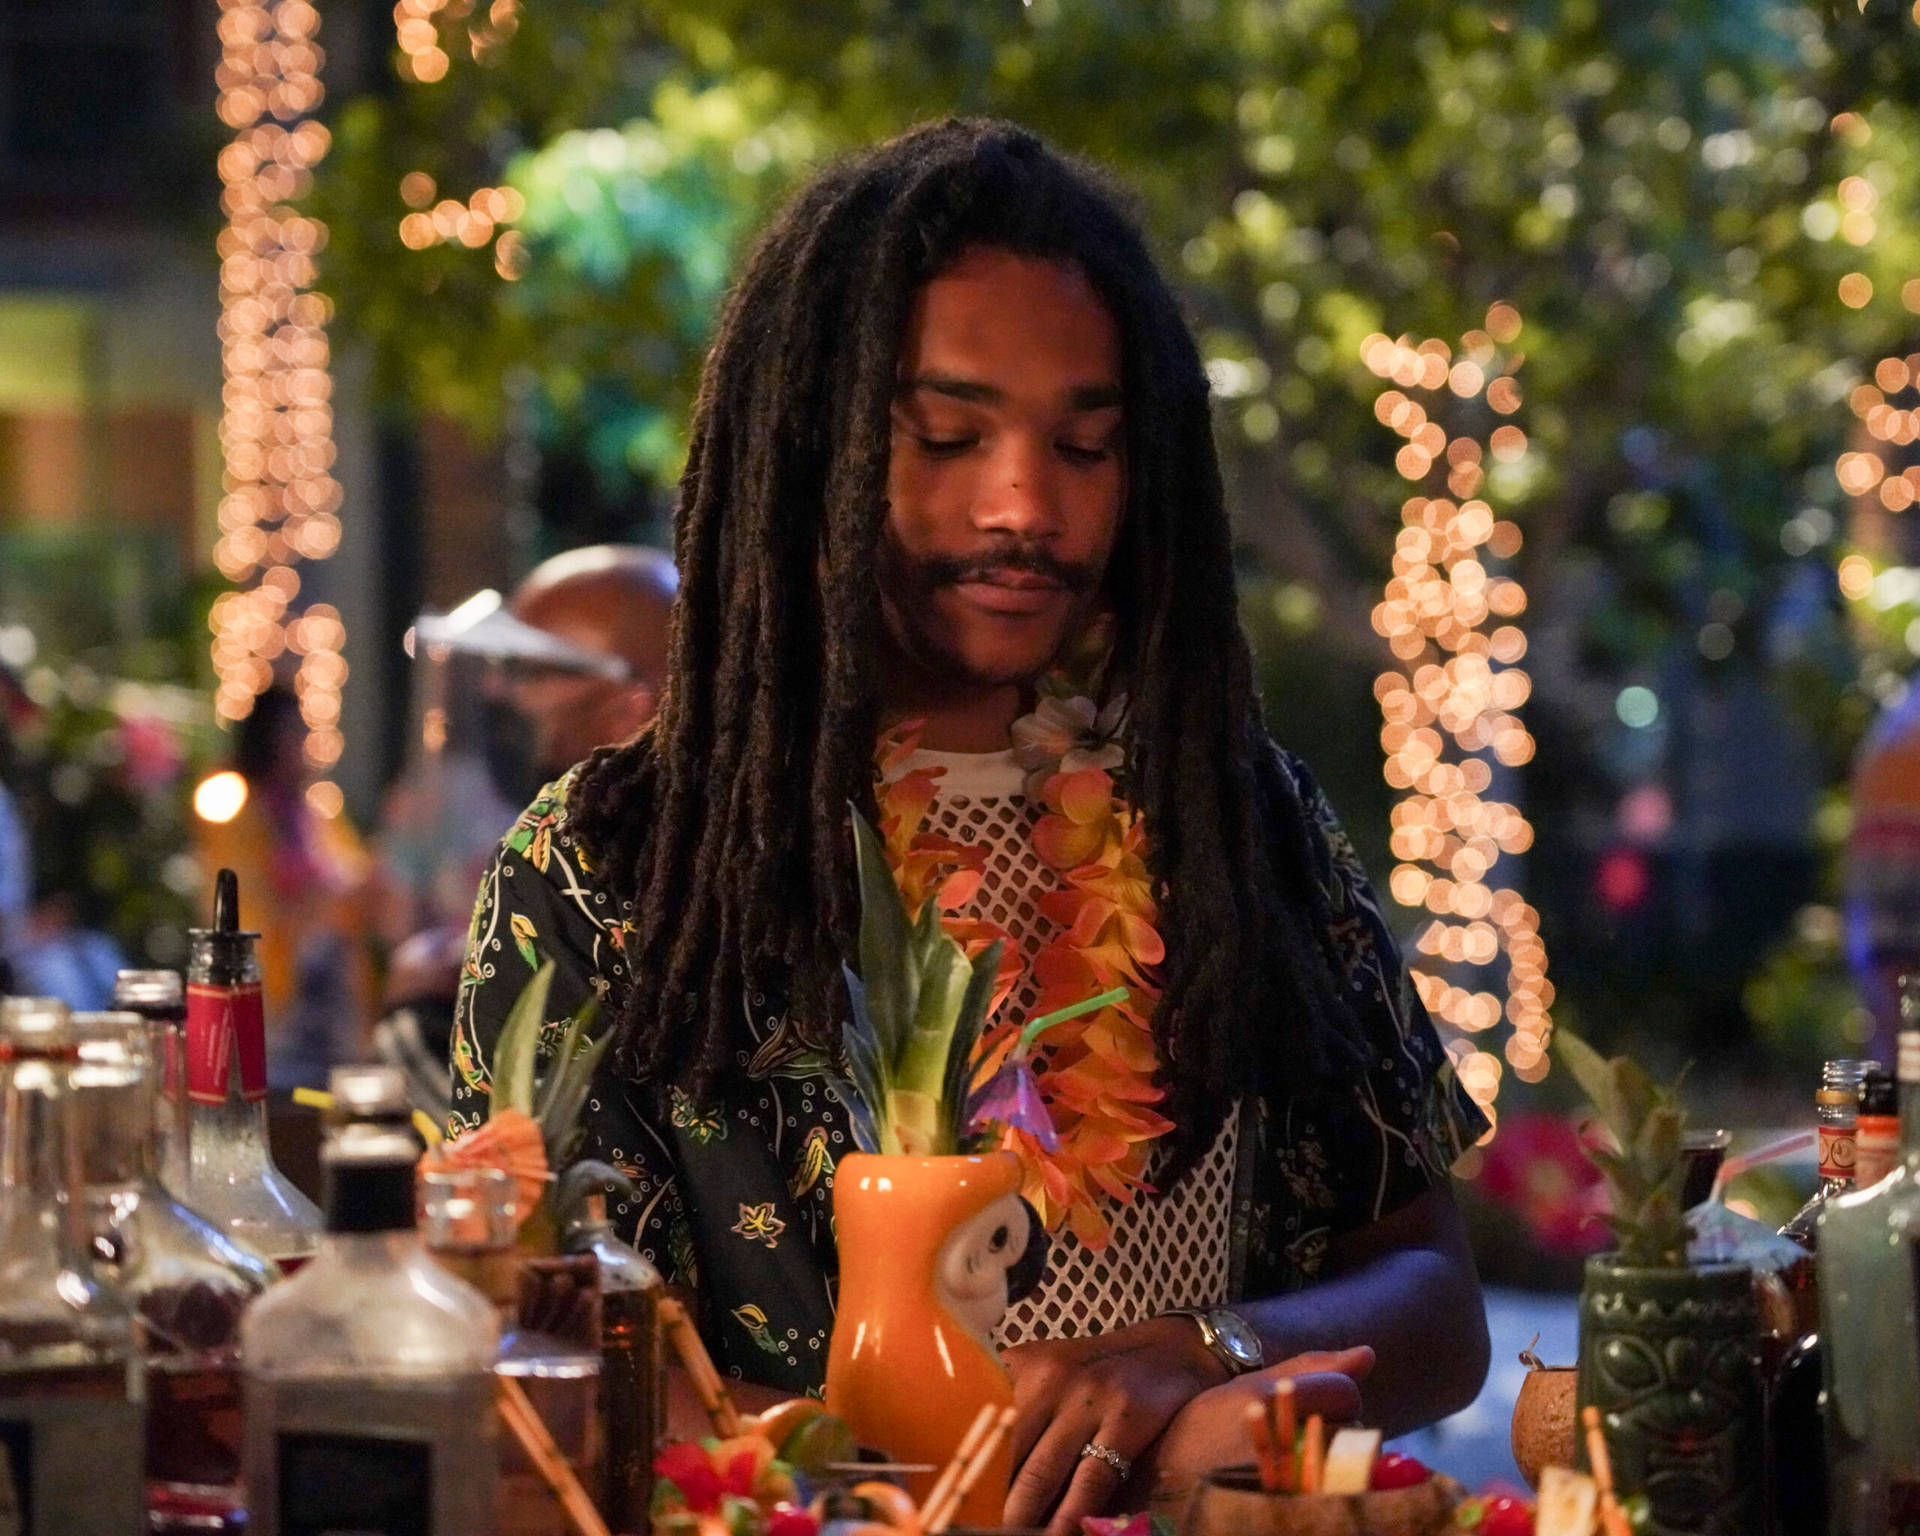 A Man With Dreadlocks Is Making Drinks At A Bar Wallpaper